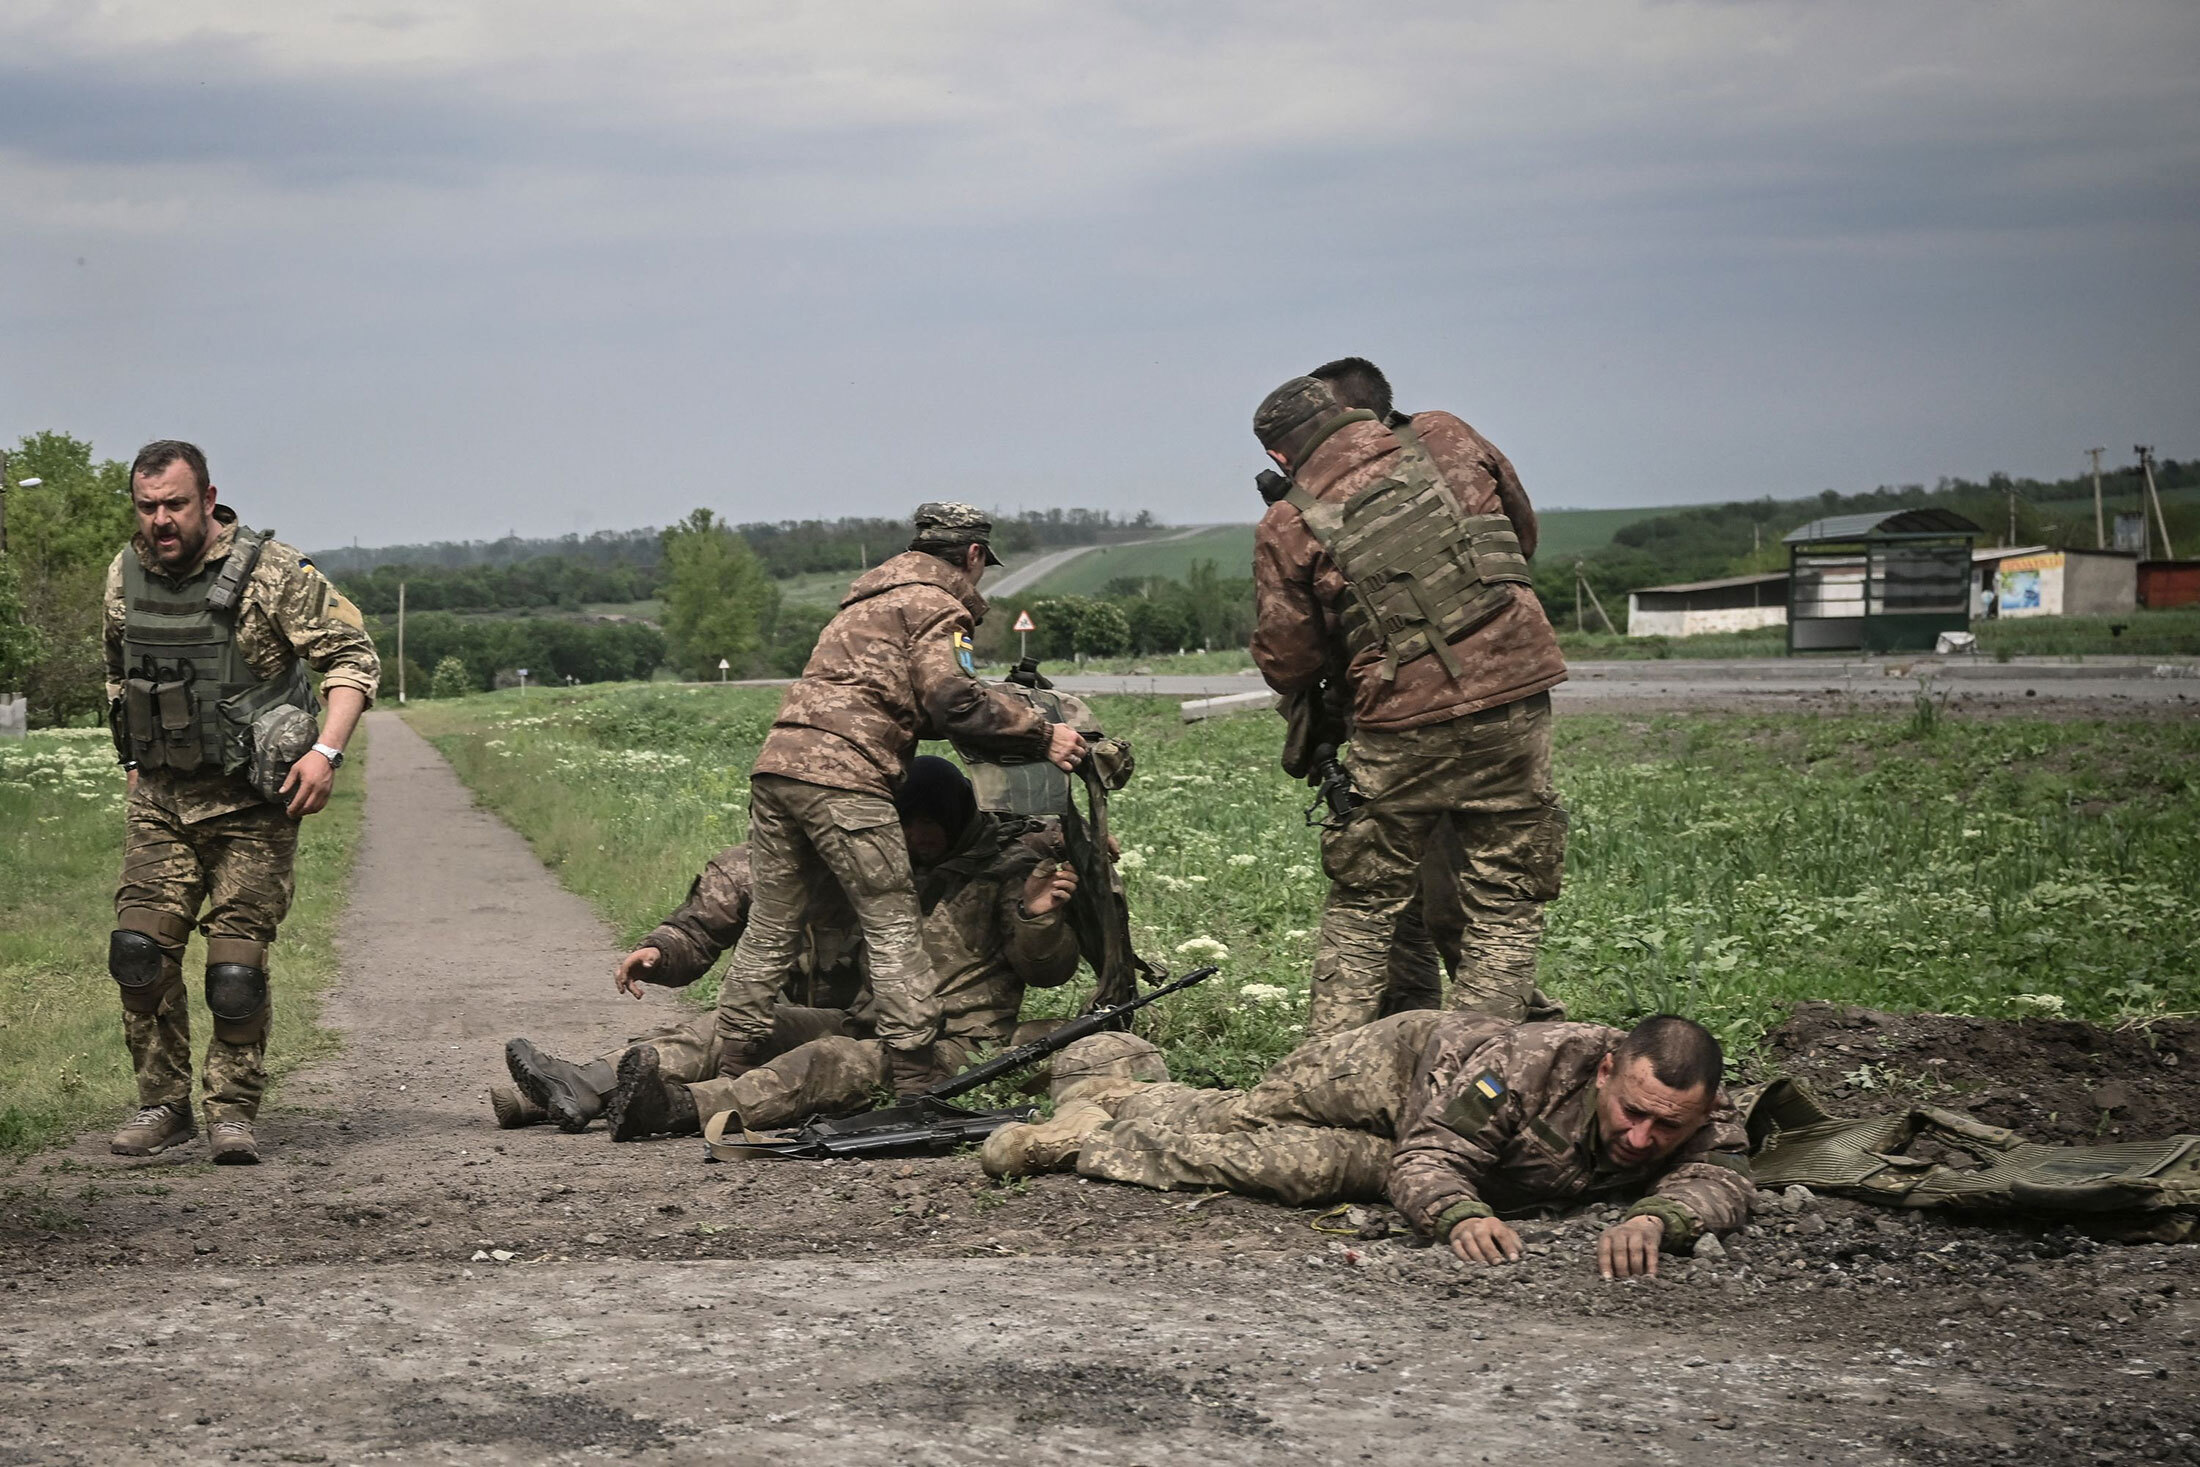 Ukrainian servicemen assist comrades near the front line in the embattled&nbsp;Donbas&nbsp;on May 21.